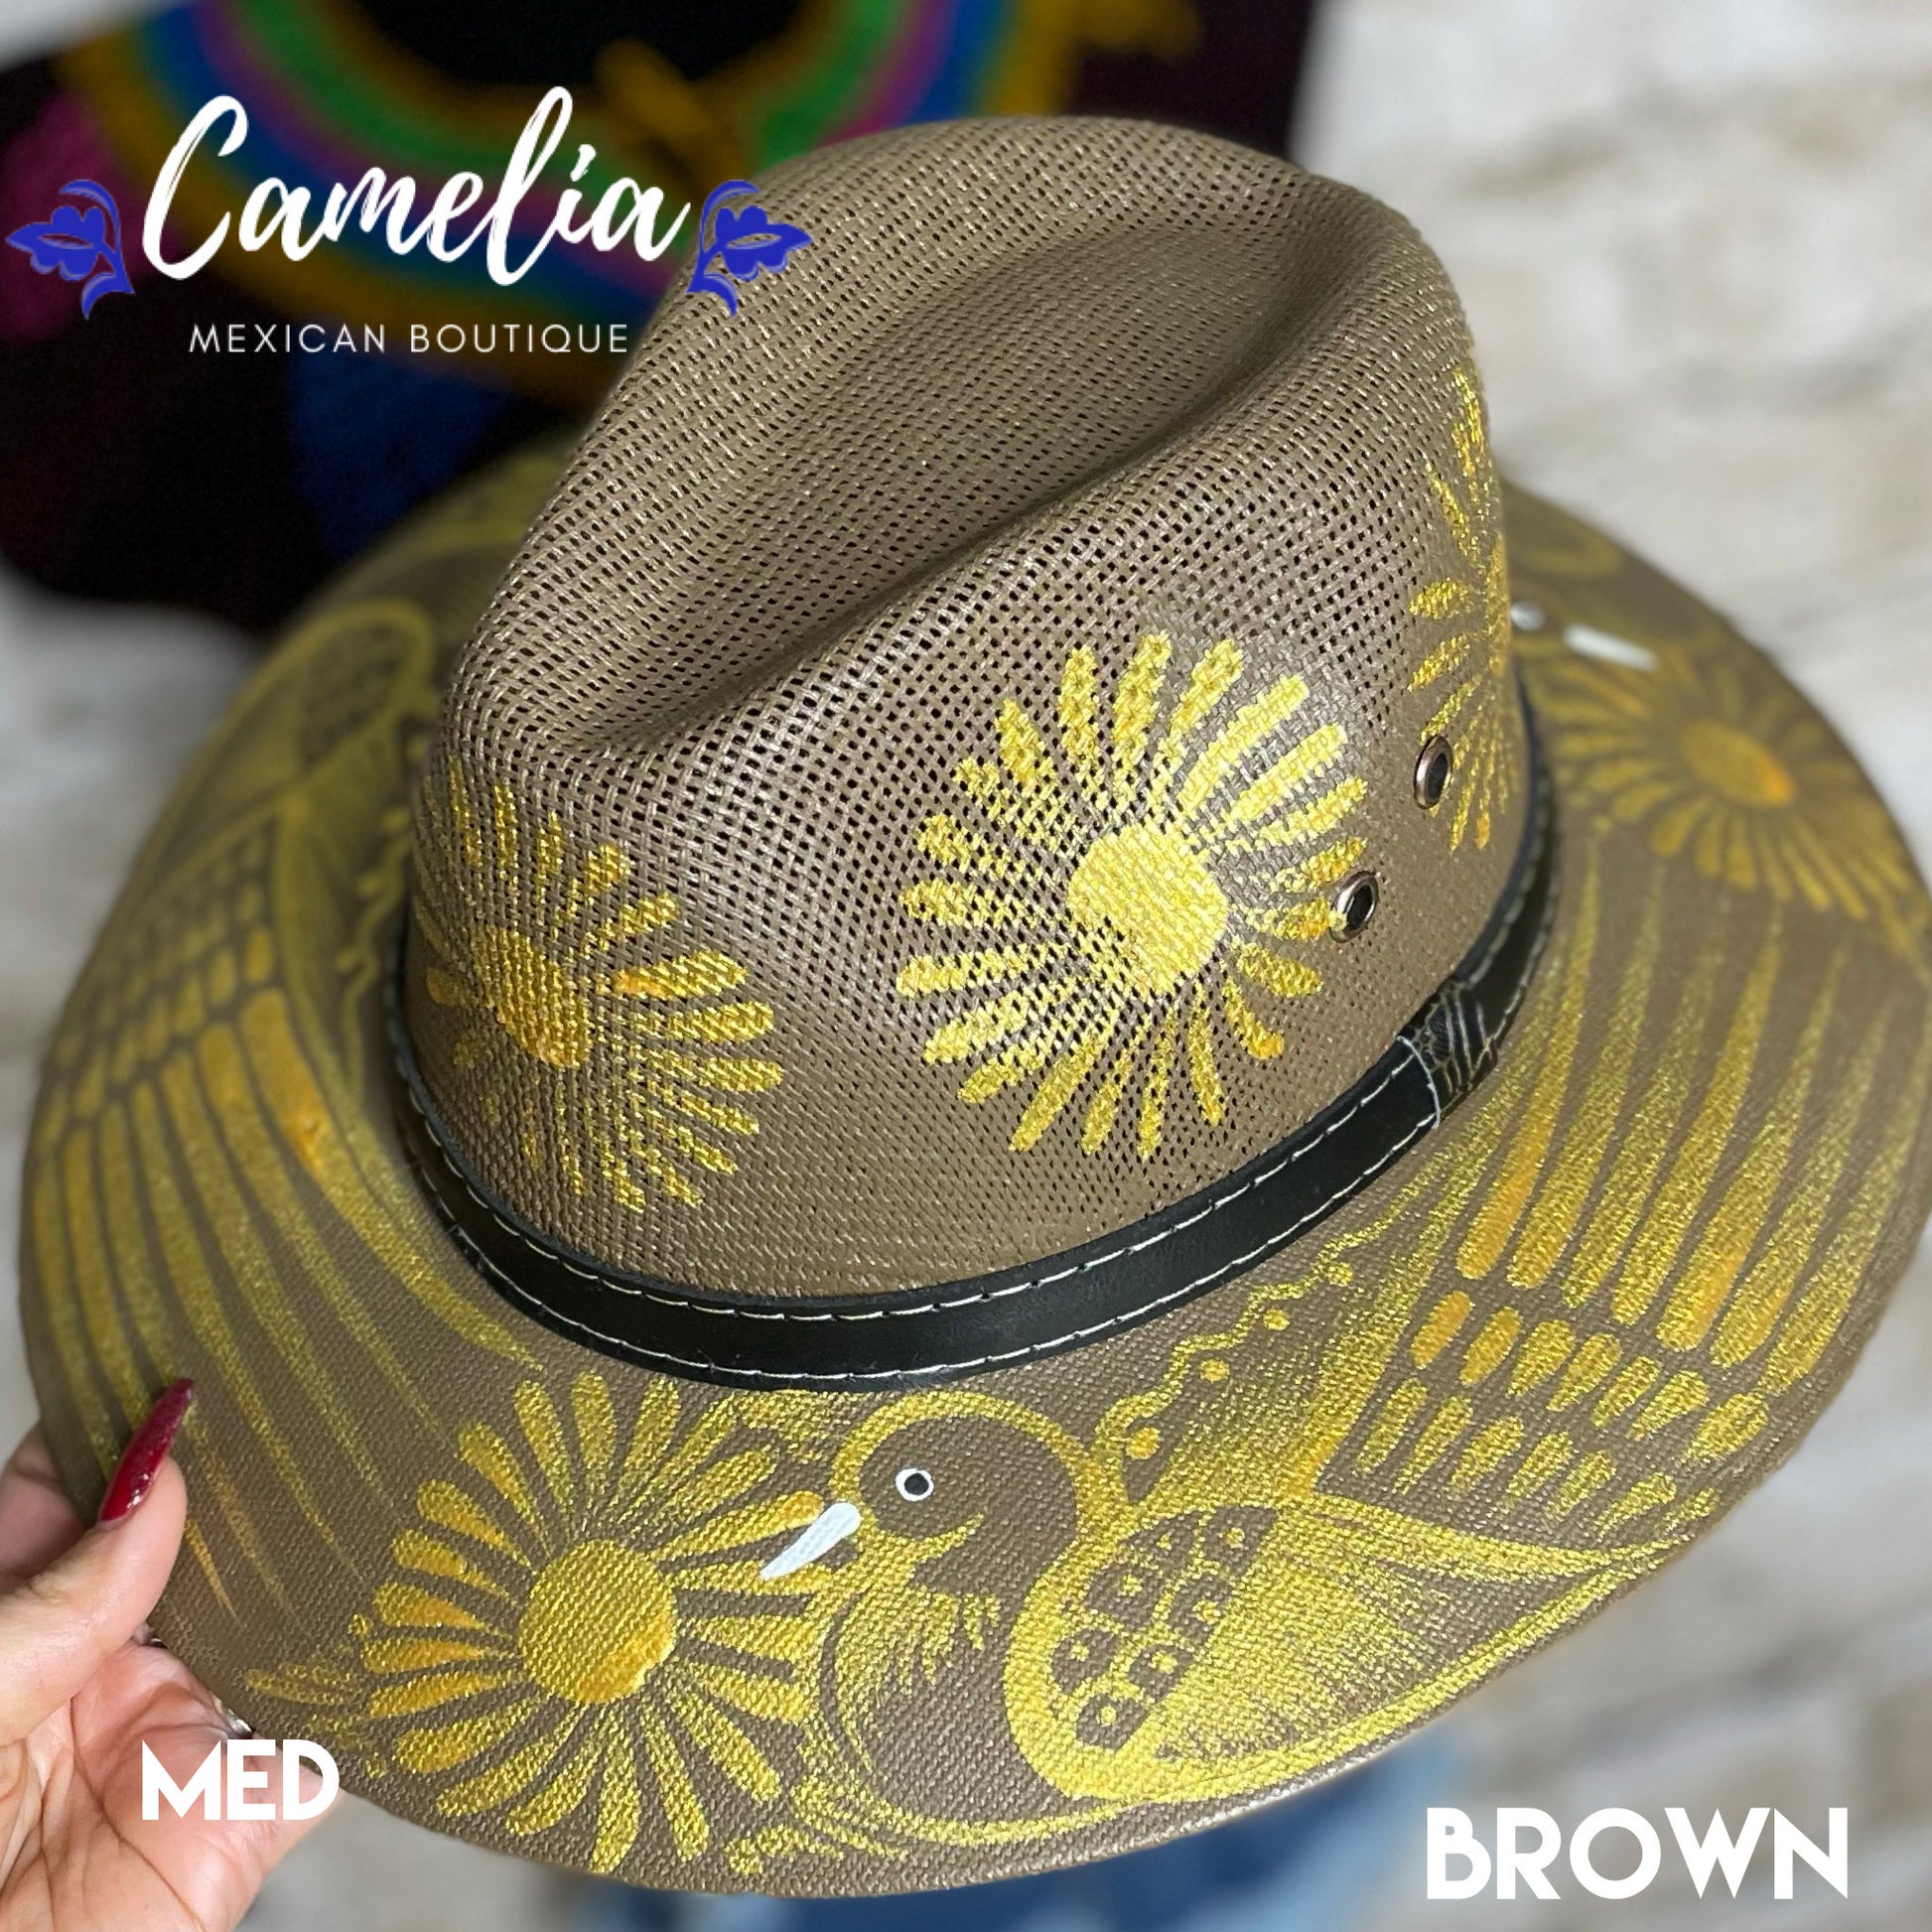 Mexican Hand Painted Sun Hat Brown / Medium